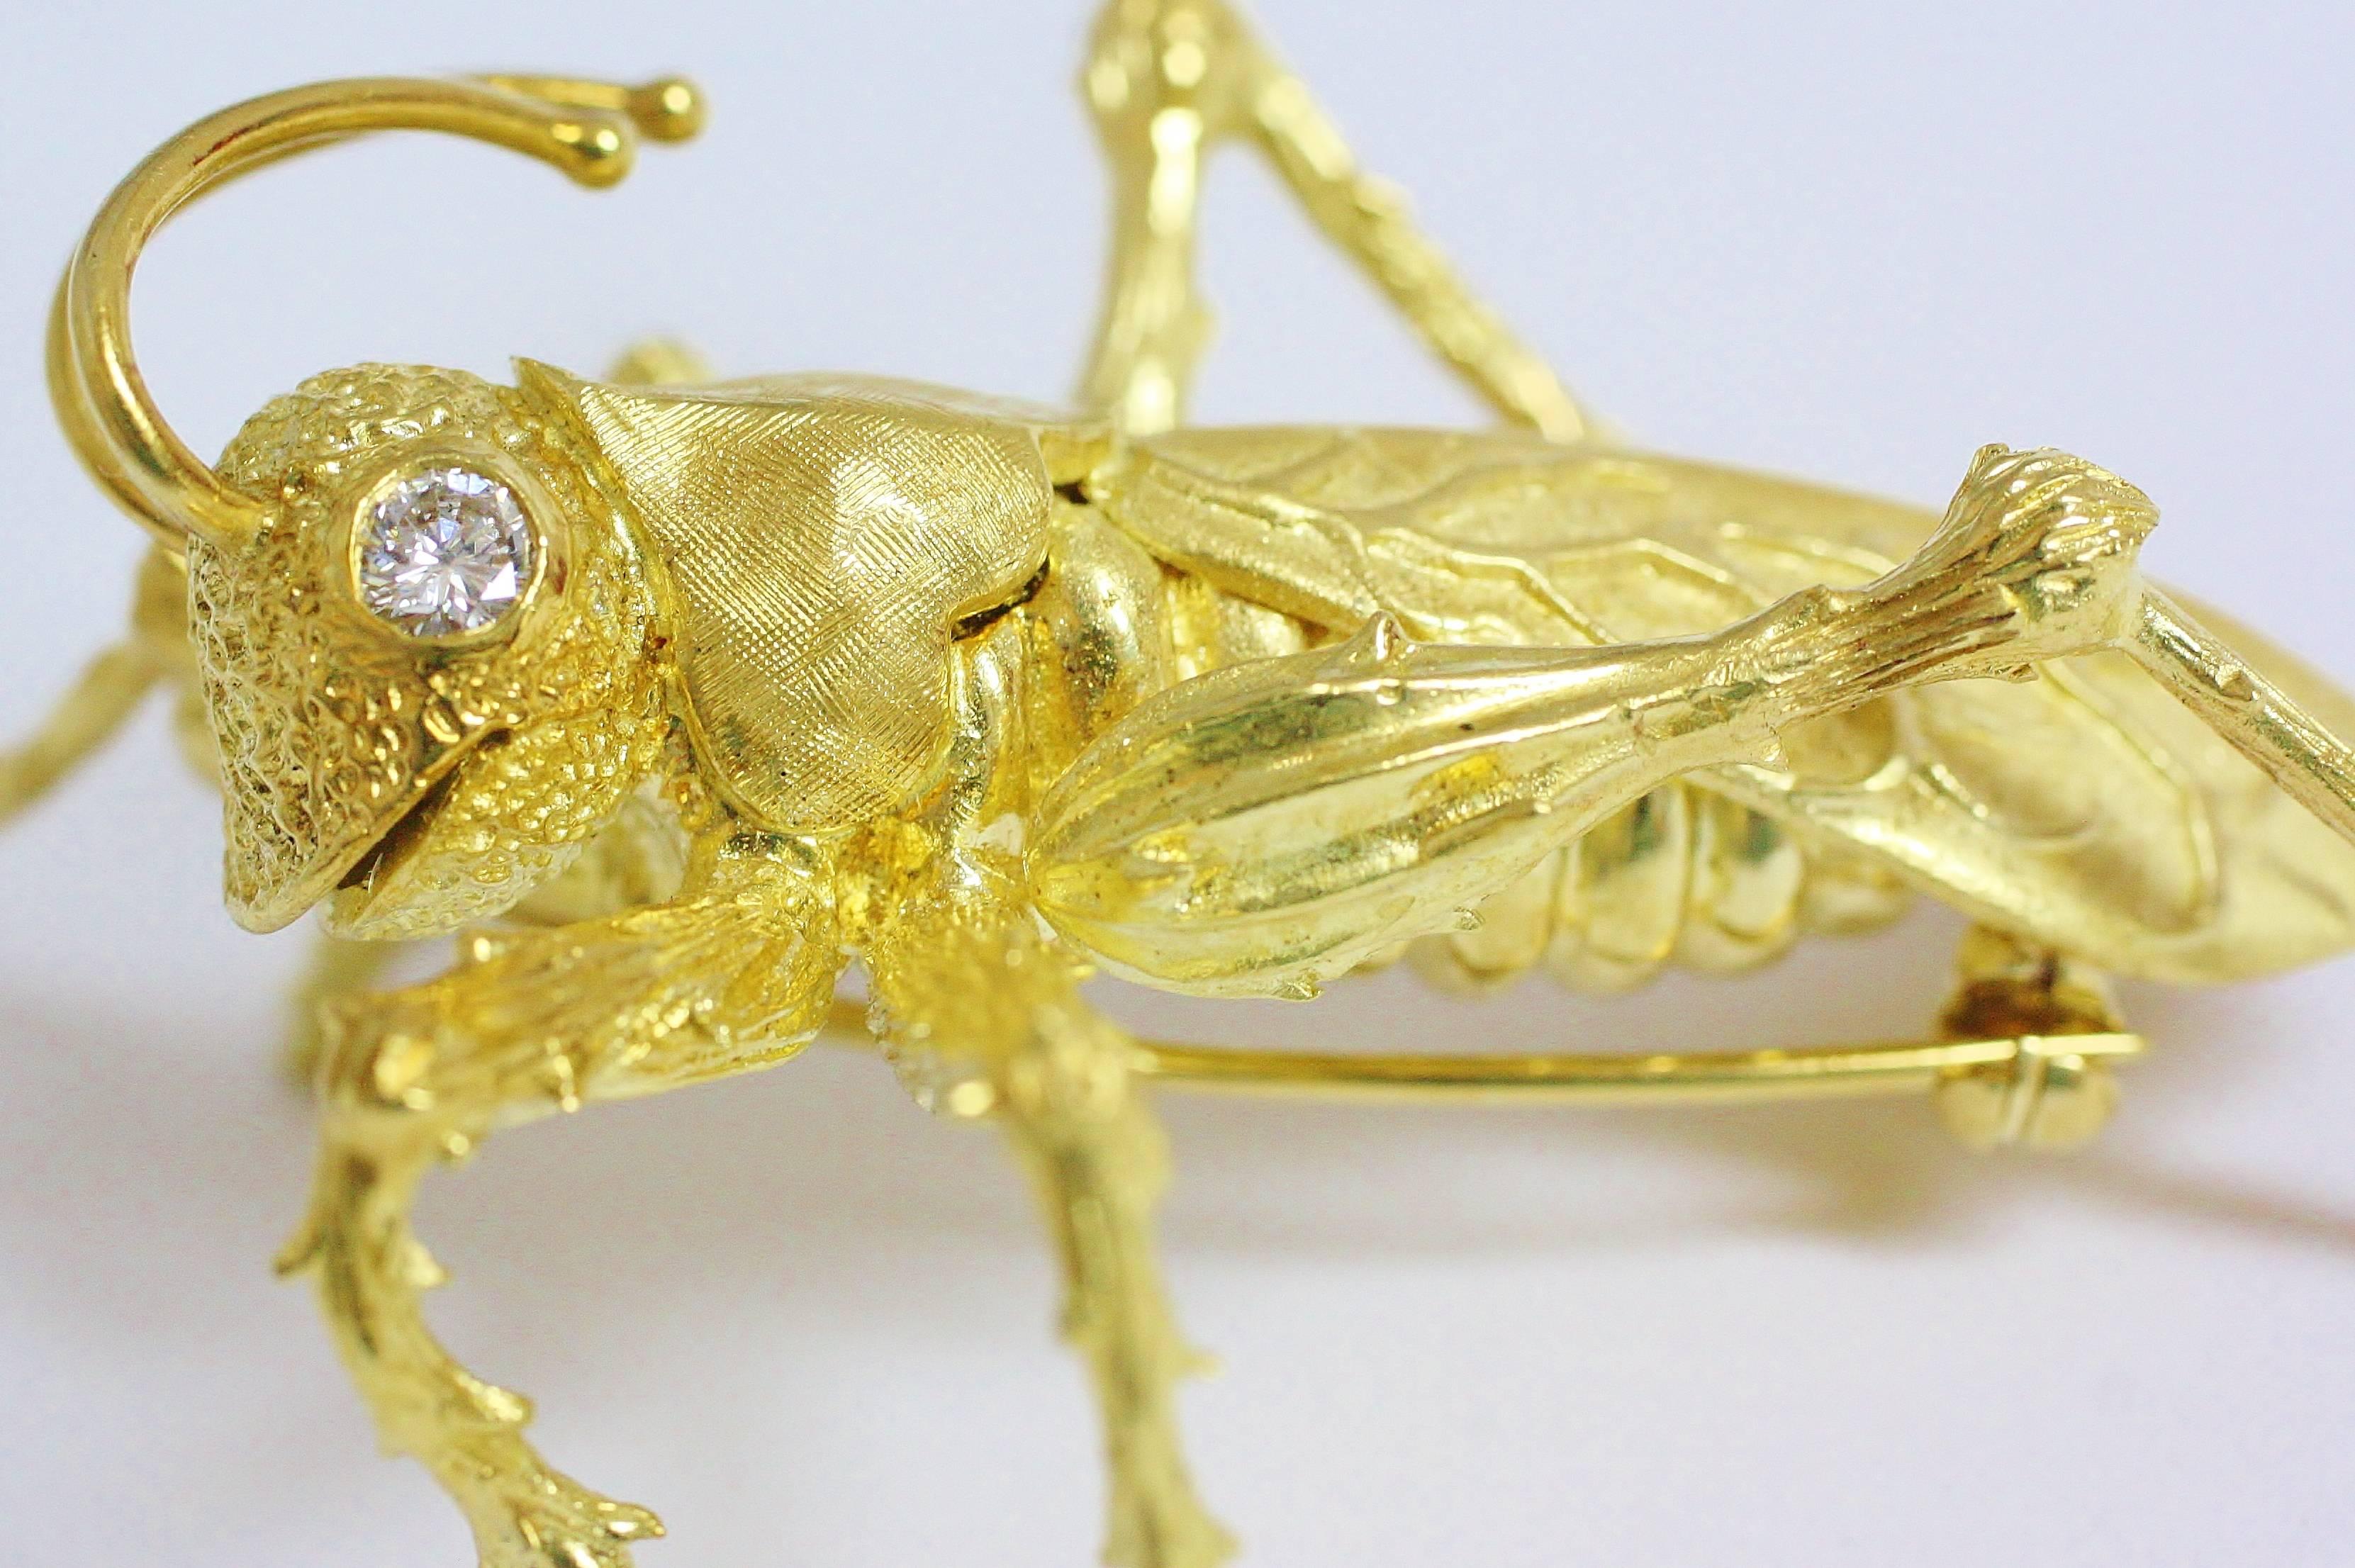 Designed and created by Kurt Wayne, this grasshopper brooch features lifelike details captured in the small marks of its antennae to the veins in its wings. It is almost as if this piece was a real grasshopper dipped in liquid gold.For its eyes,